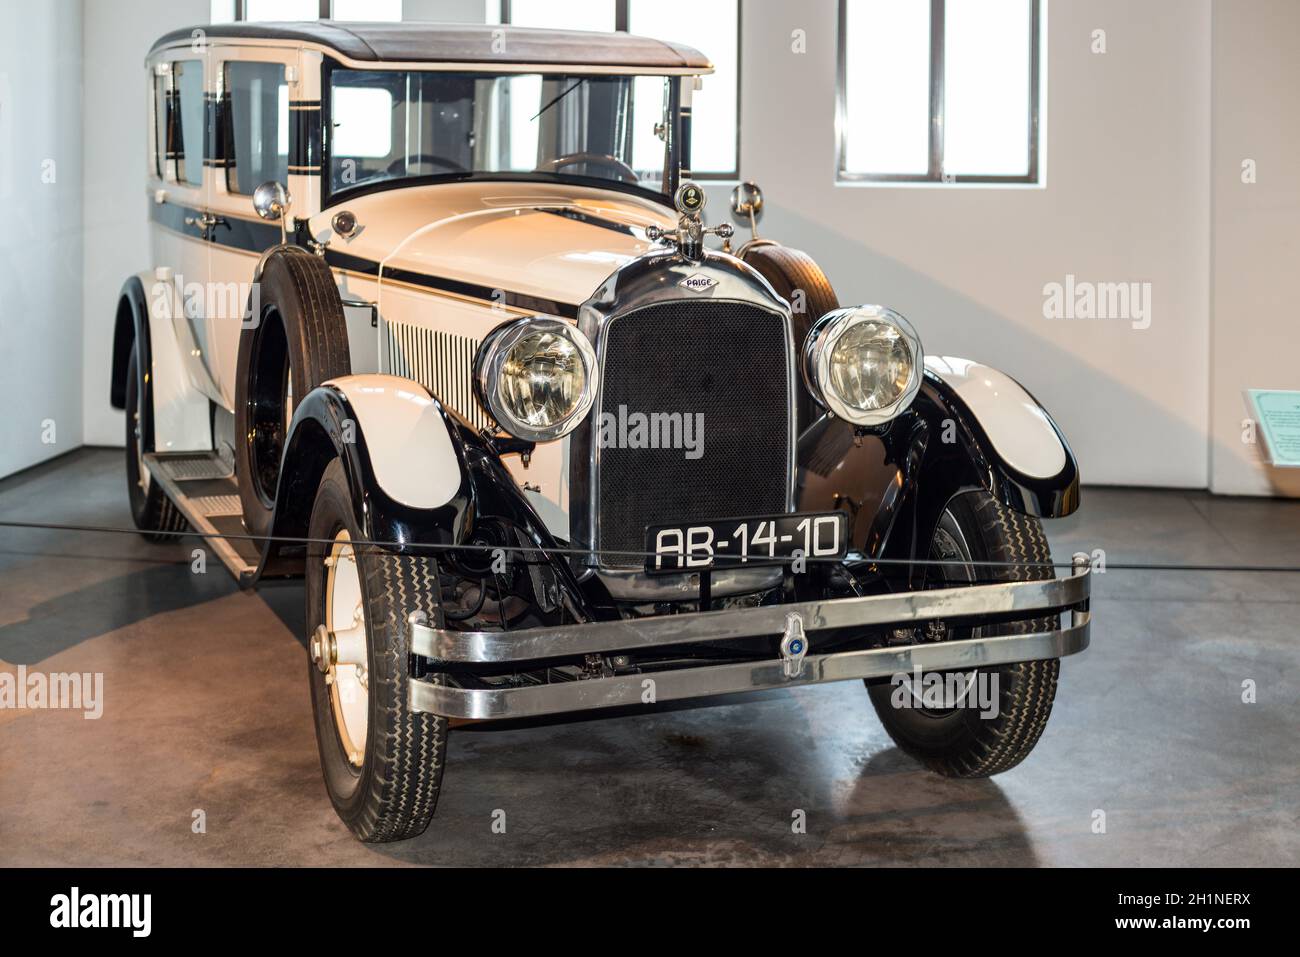 Malaga, Spain - December 7, 2016: Vintage 1927 Cavalier Graham-Paige USA car displayed at Malaga Automobile and Fashion Museum in Spain. Stock Photo